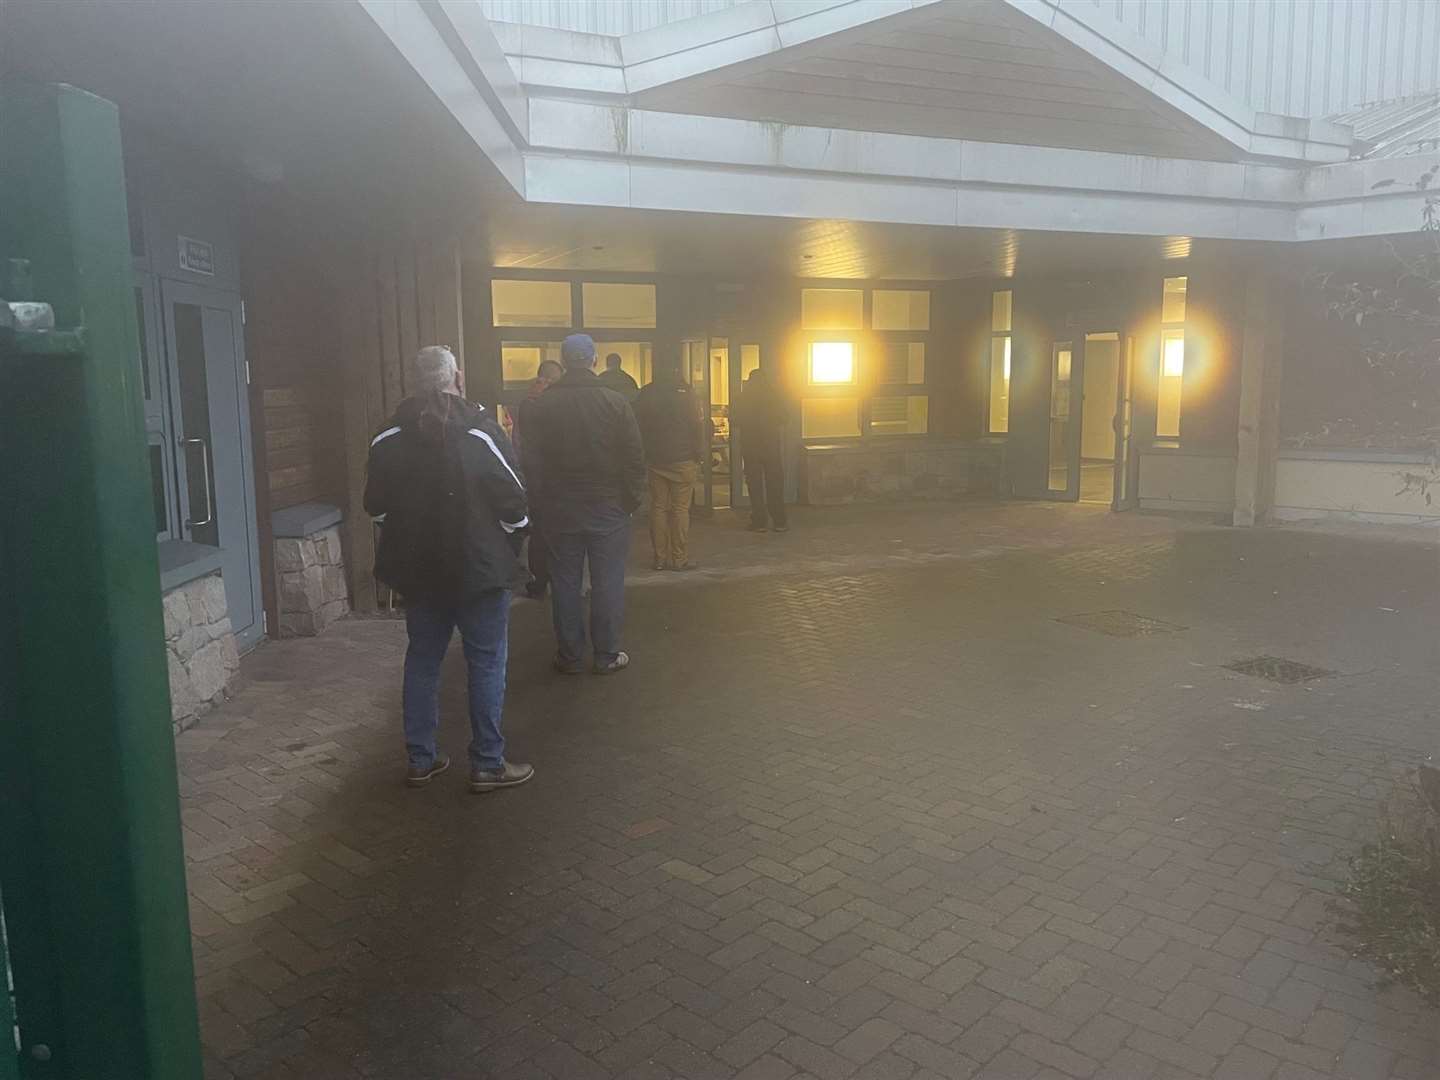 A short queue during a murky start to the day to get into the main hall where Covid boosters are being administered.